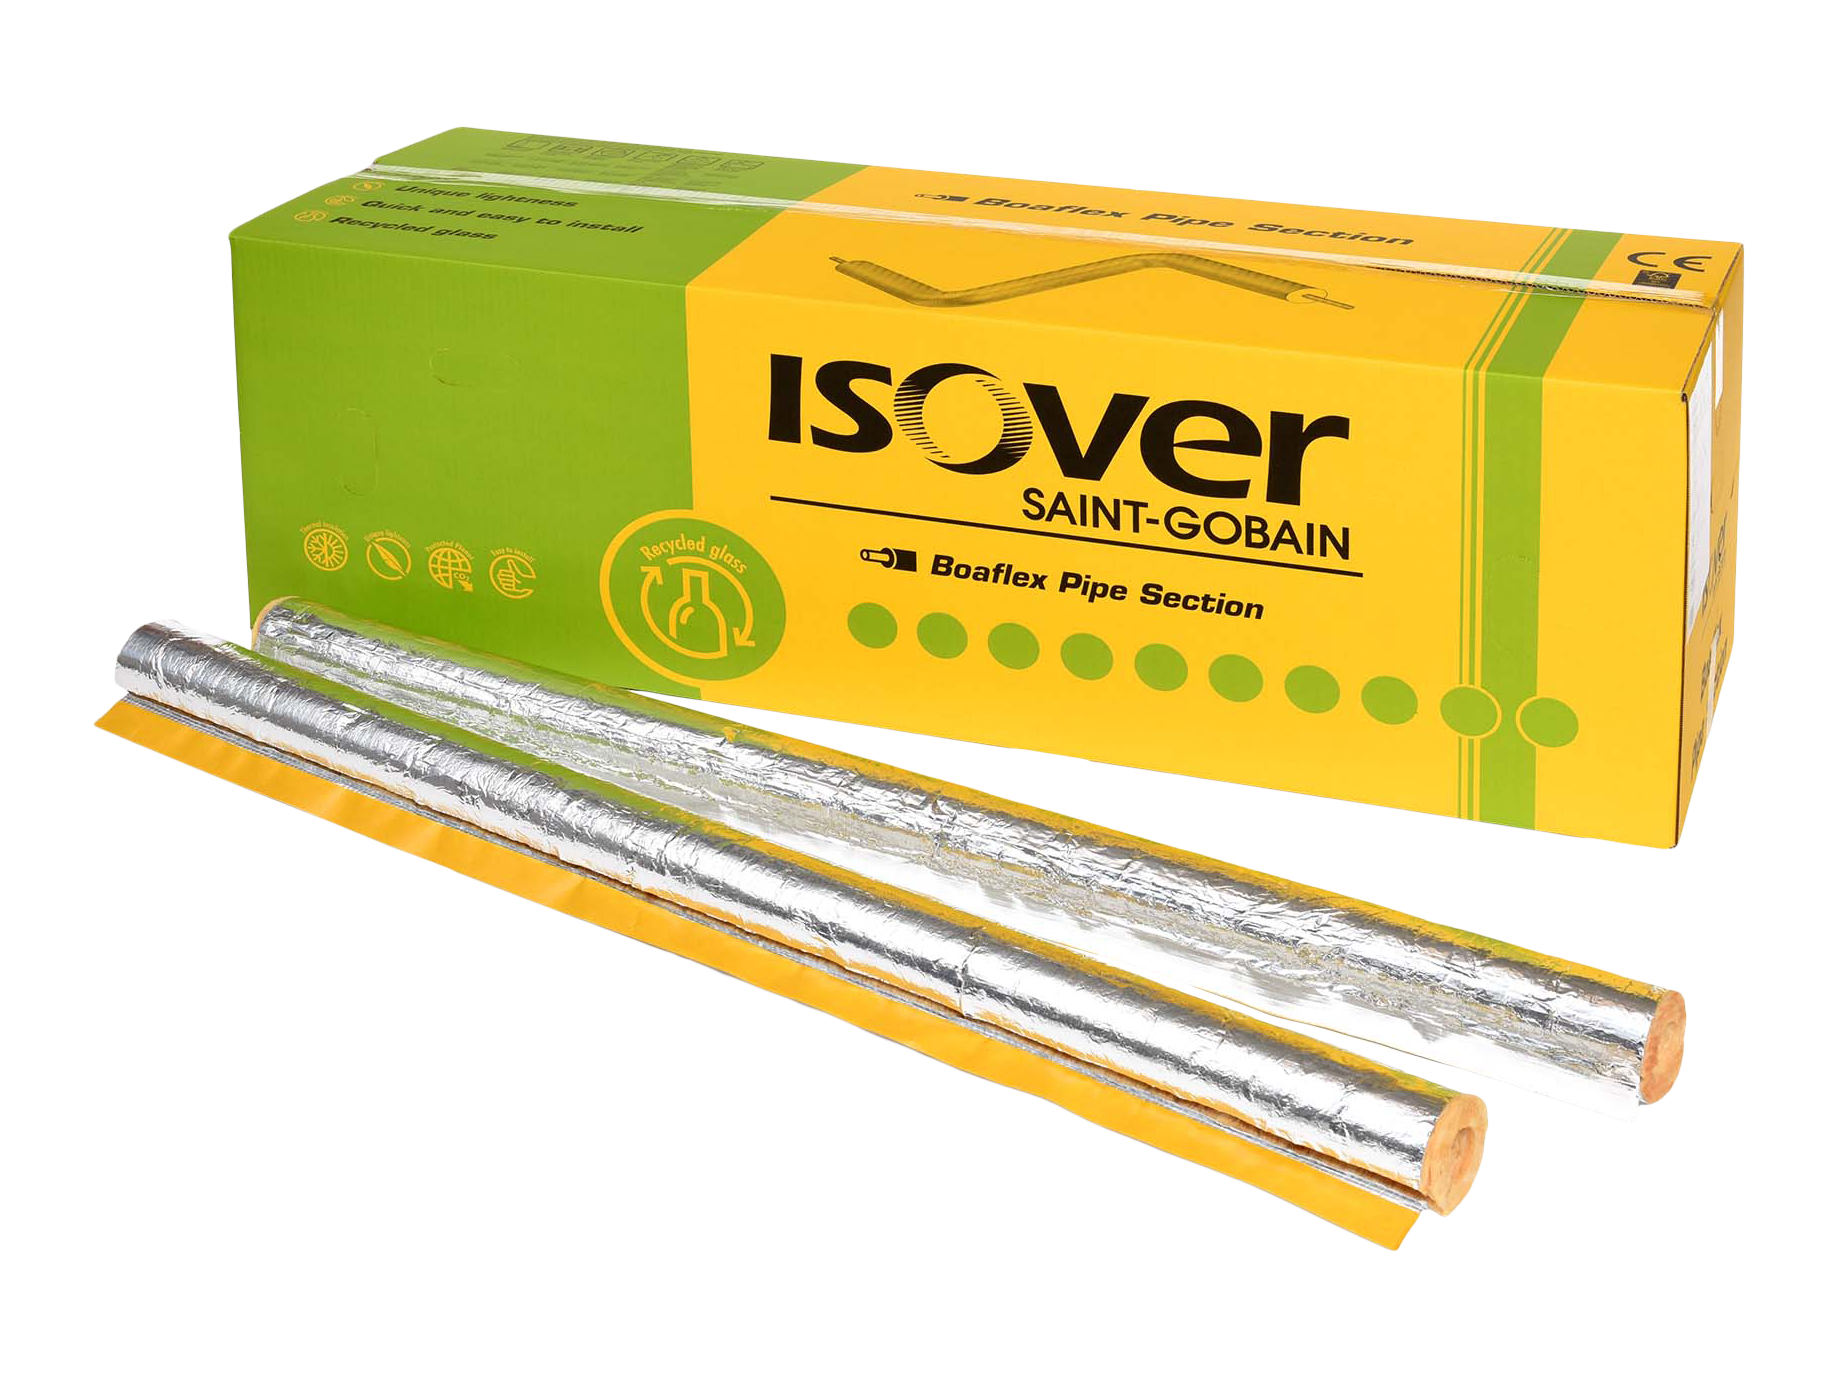 ISOVER Boaflex Pipe Section 48/30